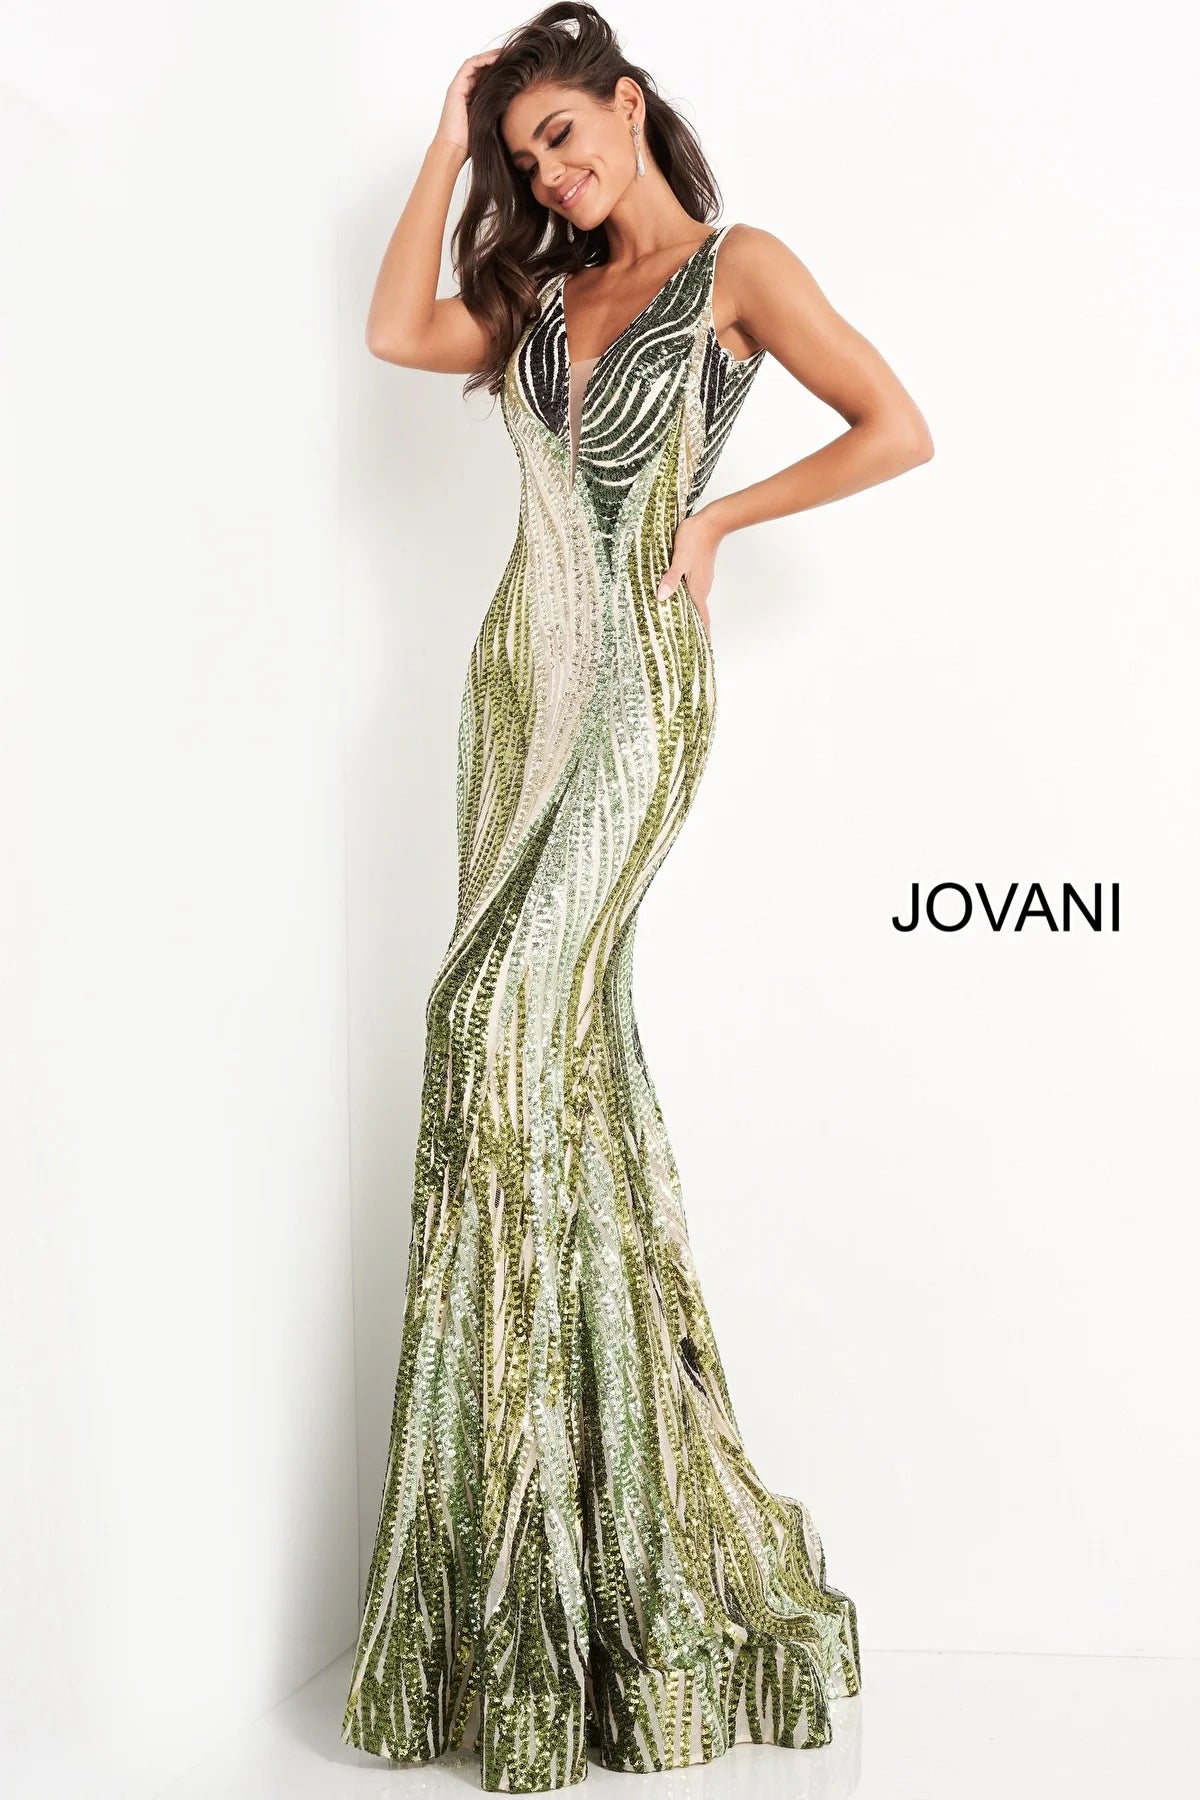 Jovani 05103 Embellished Plunging Neckline Dress B Chic Fashions Long Dress Evening Gowns